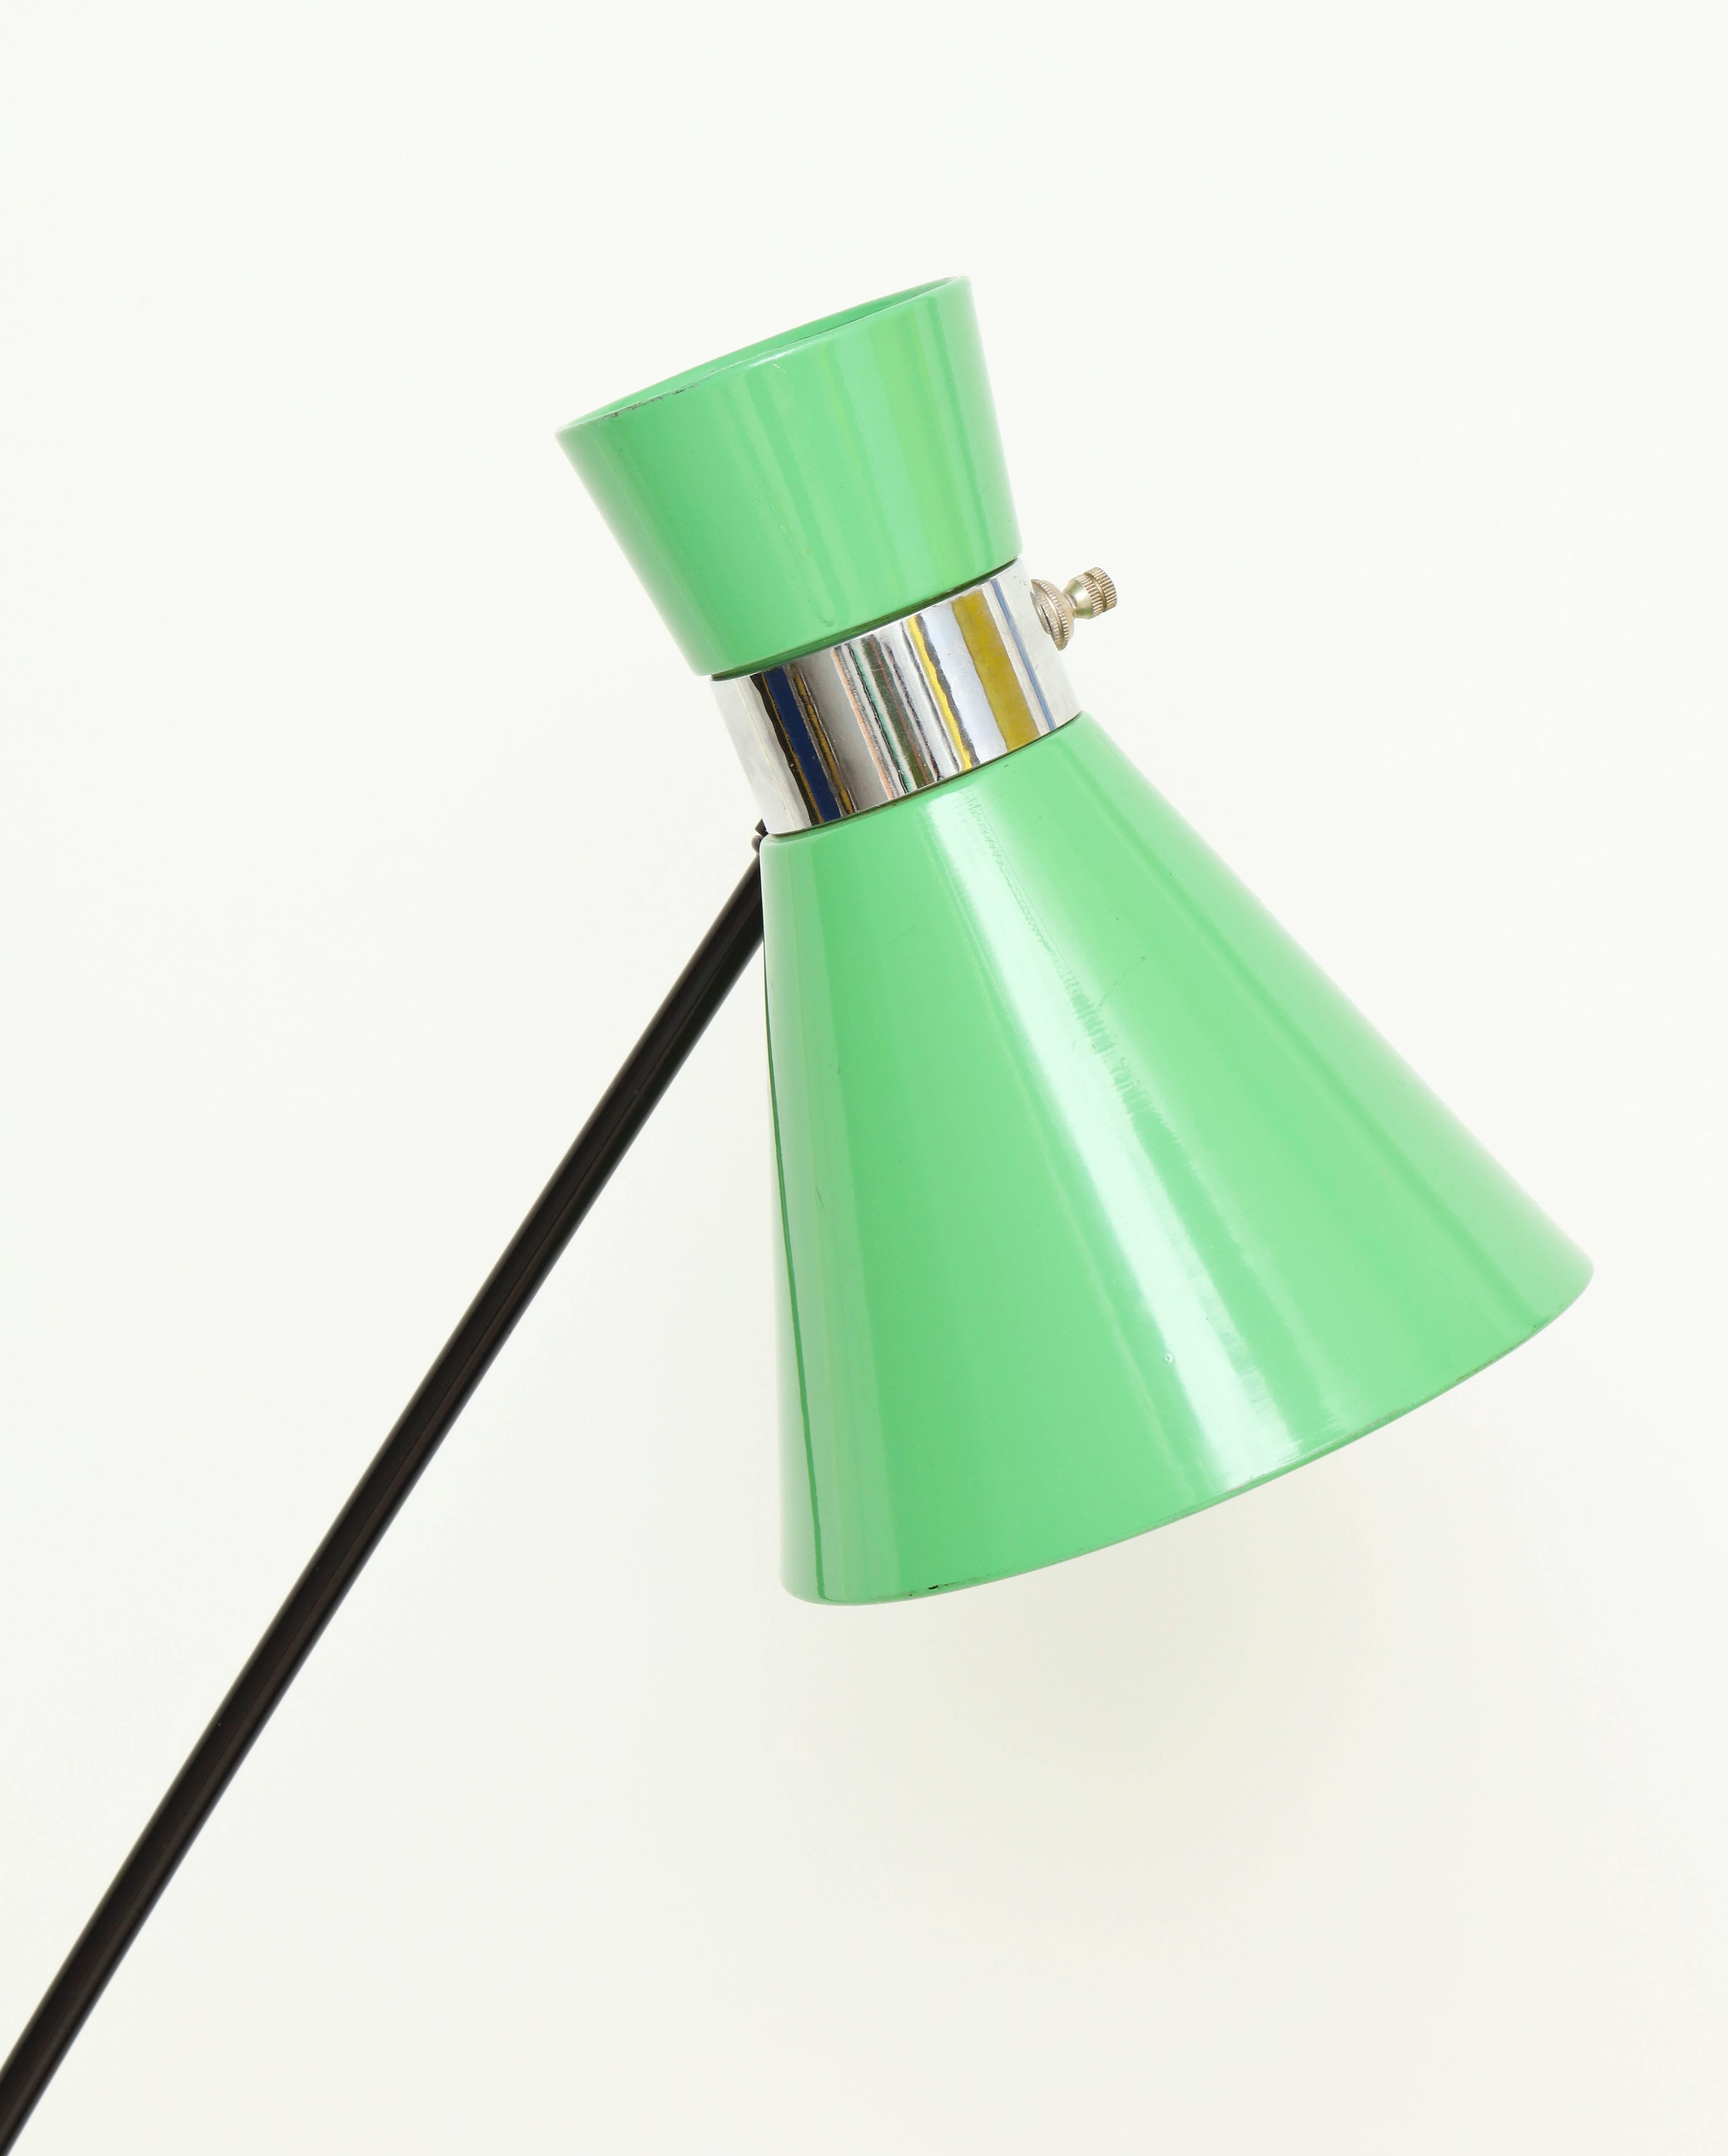 Superb tripod standing lamp with adjustable shade.